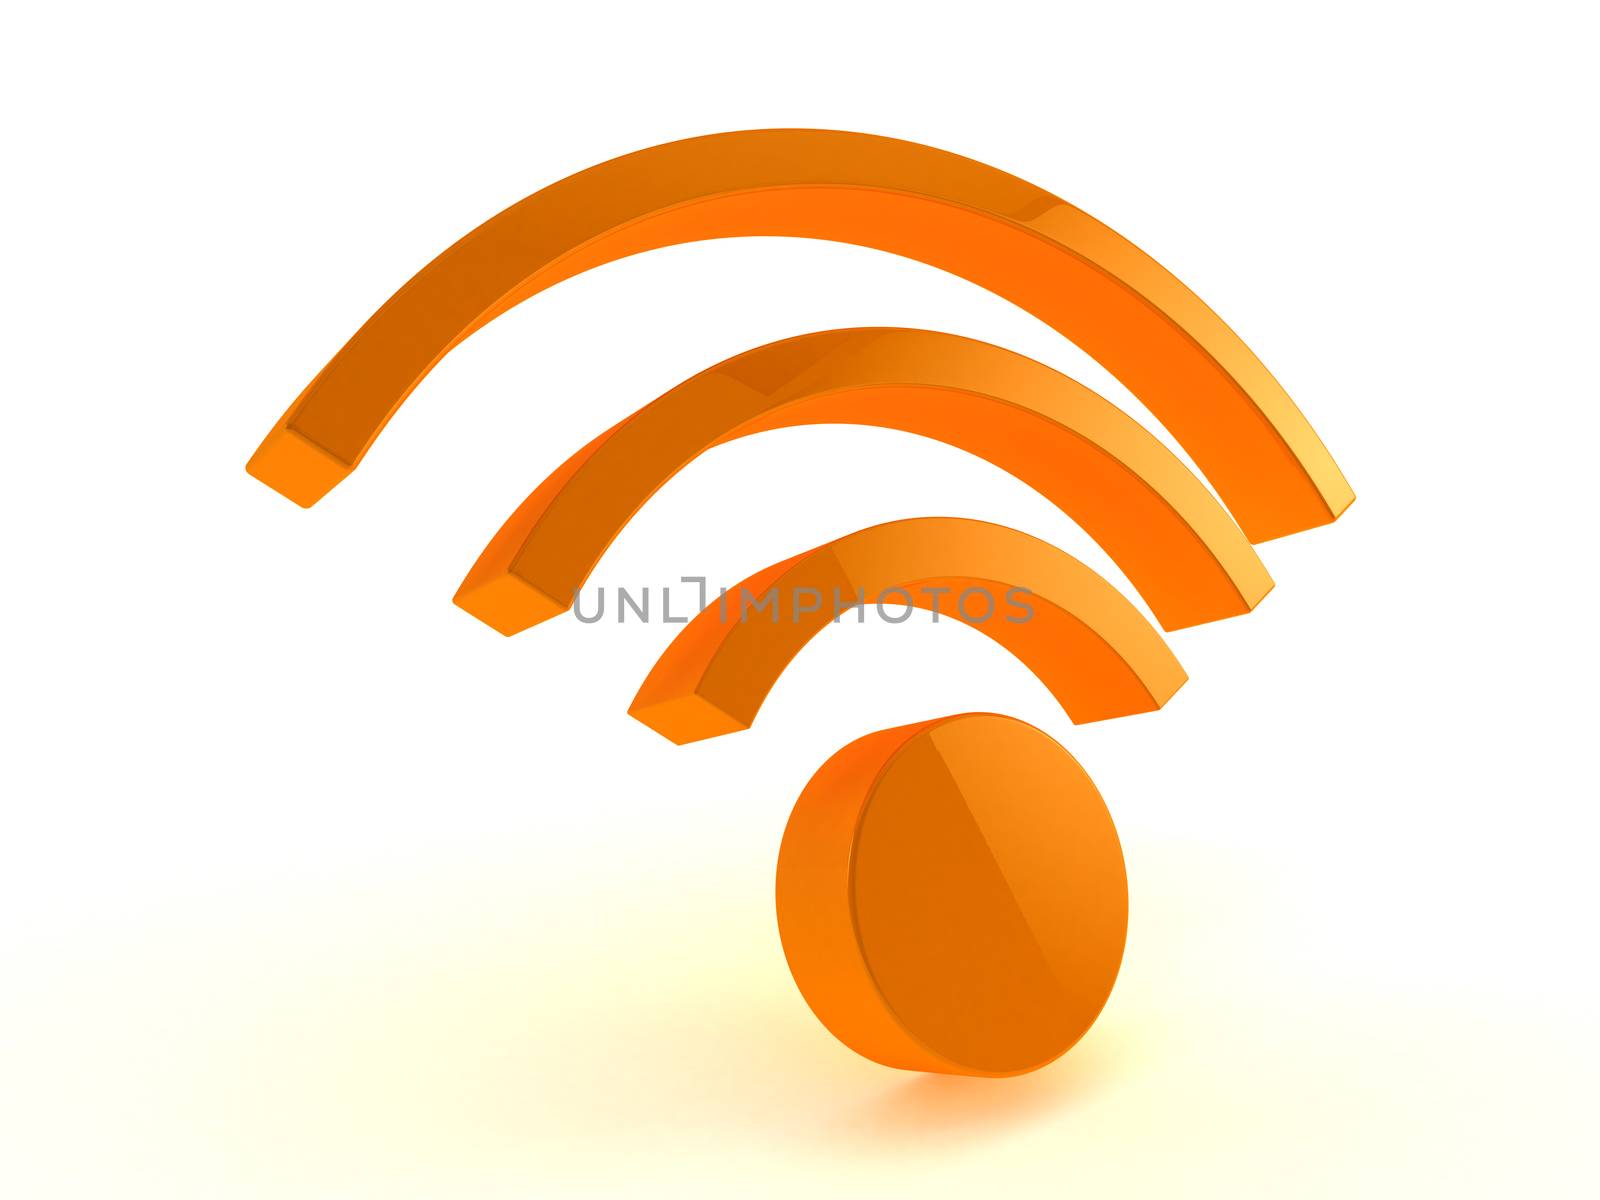 3D render of wifi icon on white background.